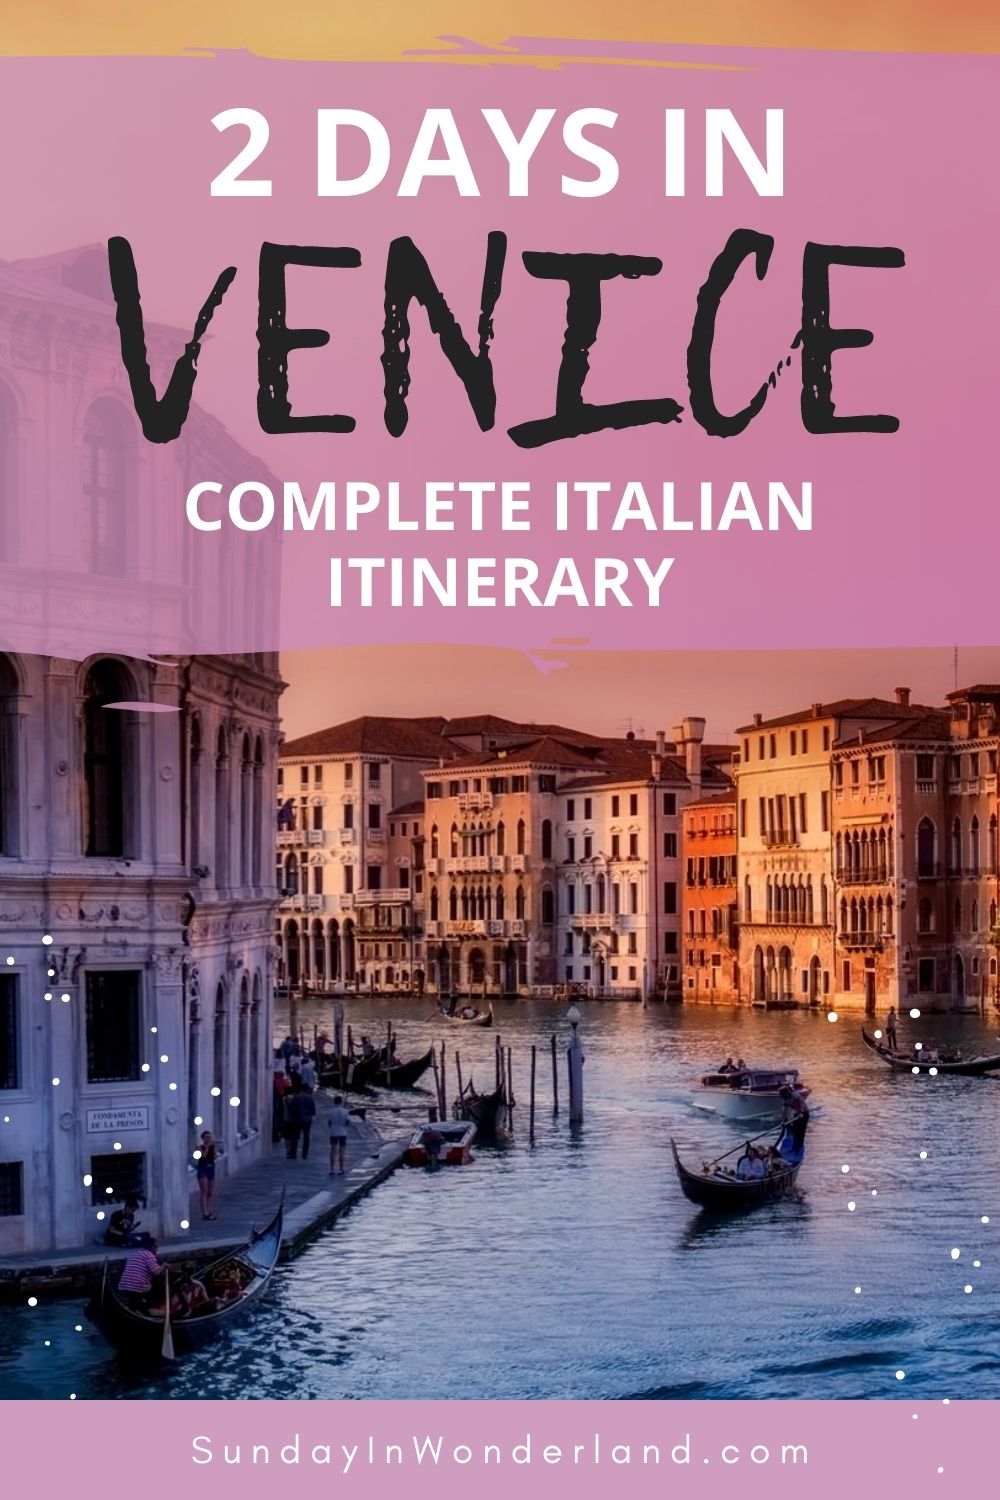 2 days in Venice - complete Italian Itinerary